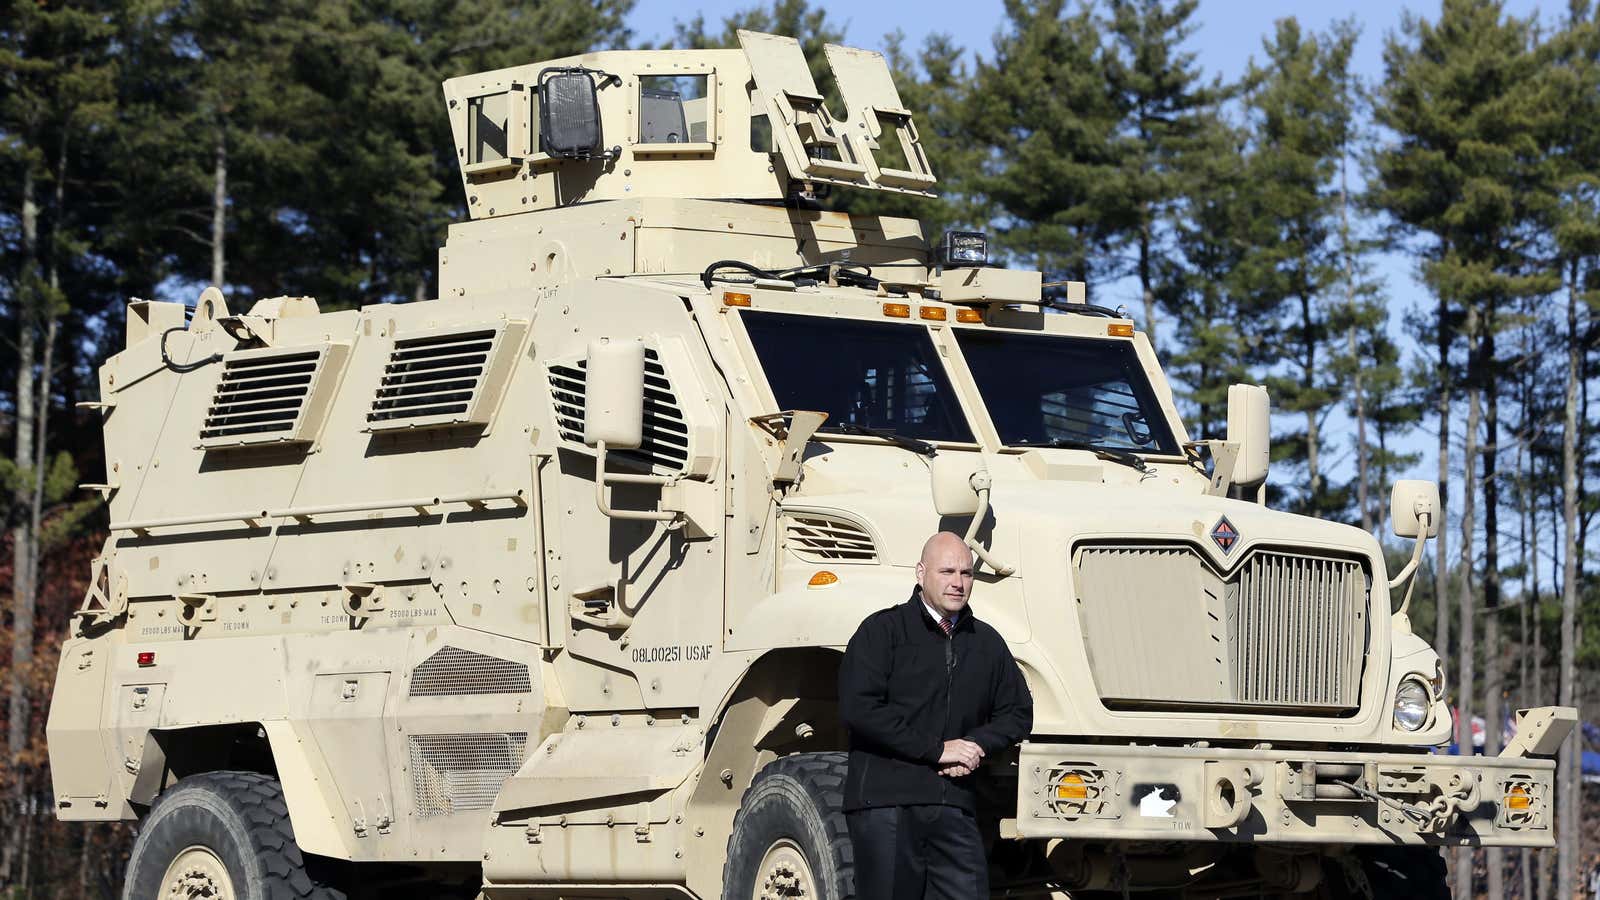 A mine resistant ambush protected vehicle in Queensbury, NY.